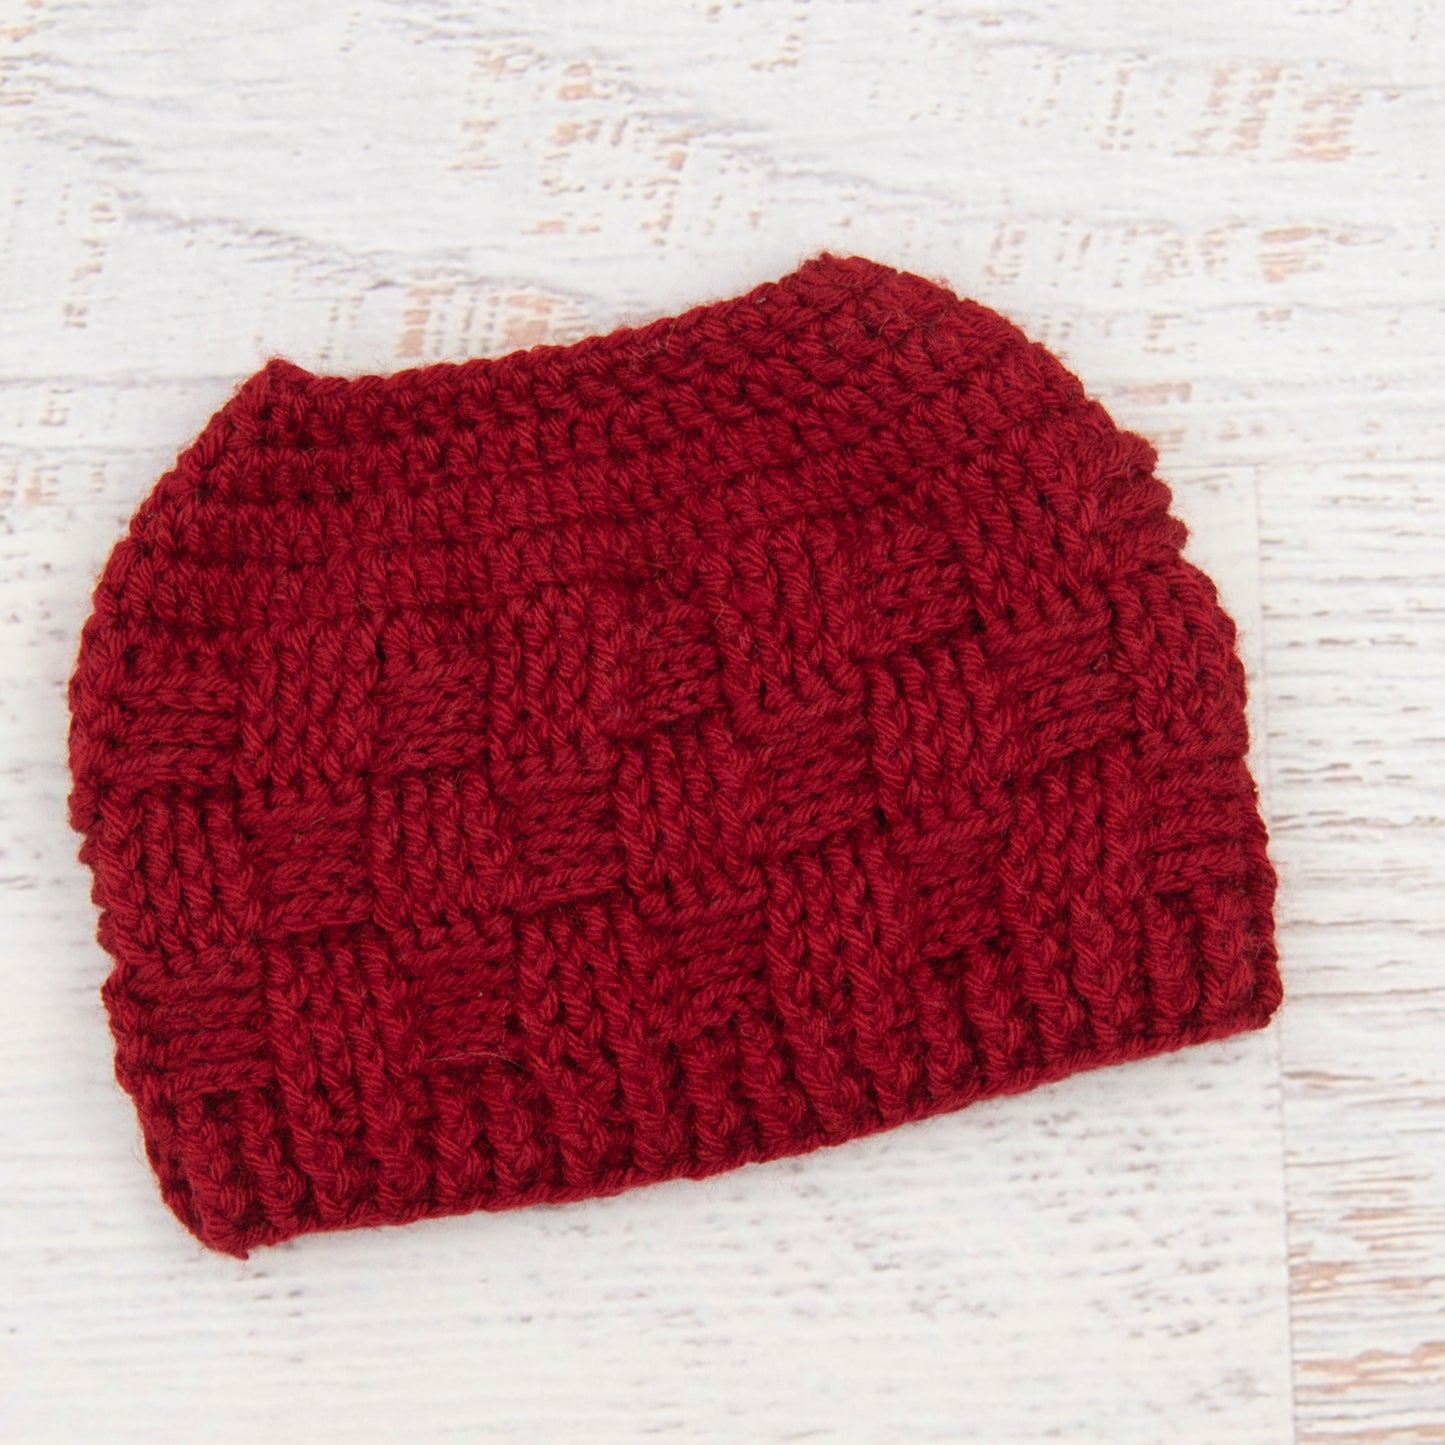 In-Stock 3-10 Year The 'Everyday' Messy Bun Hat in Cranberry